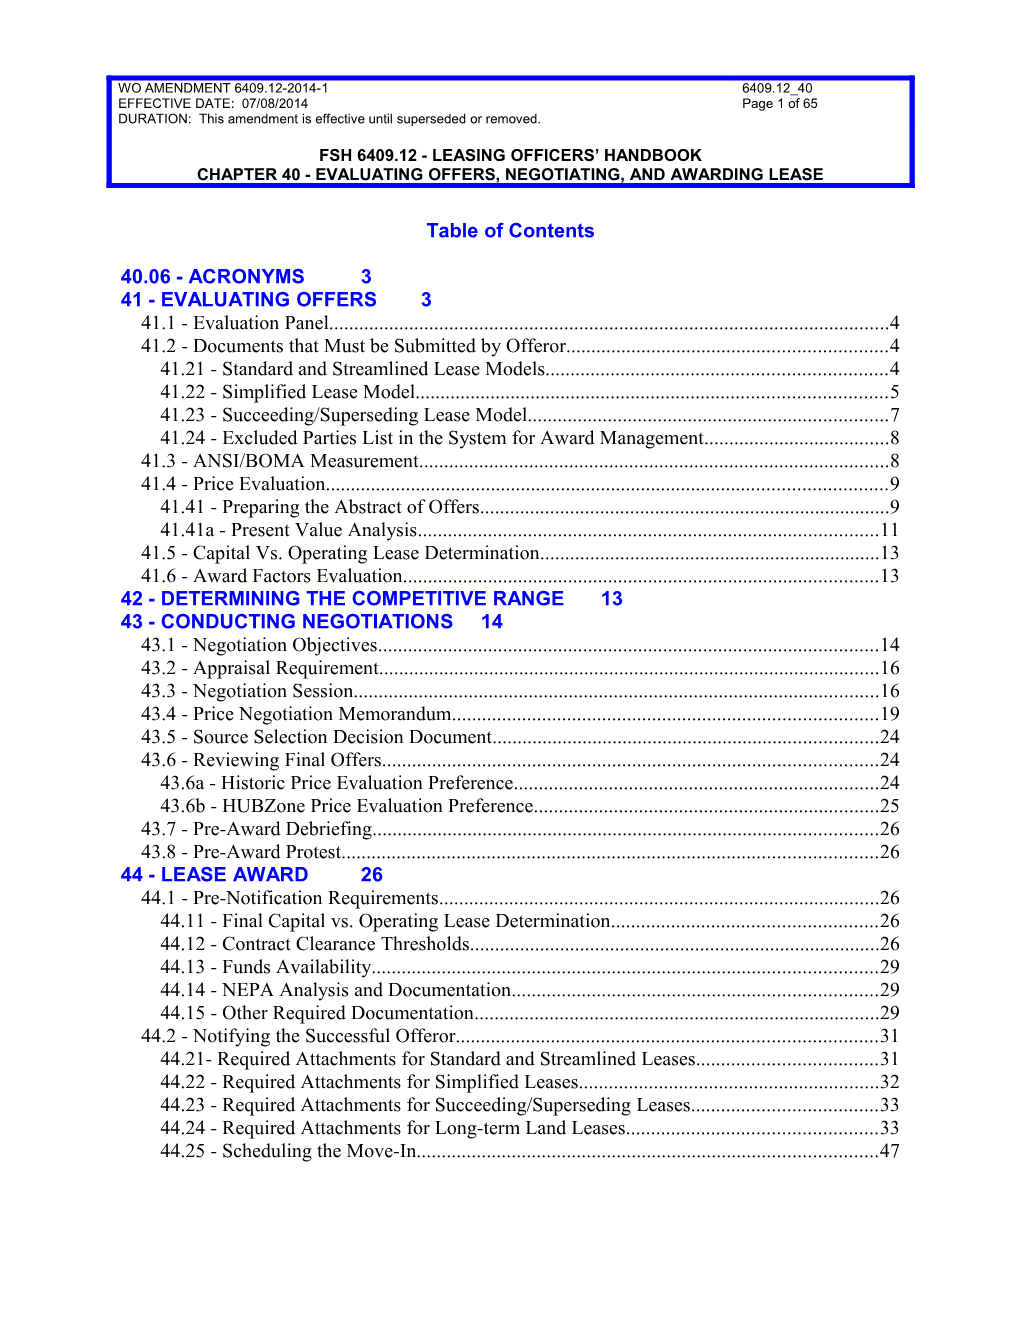 Table of Contents s526